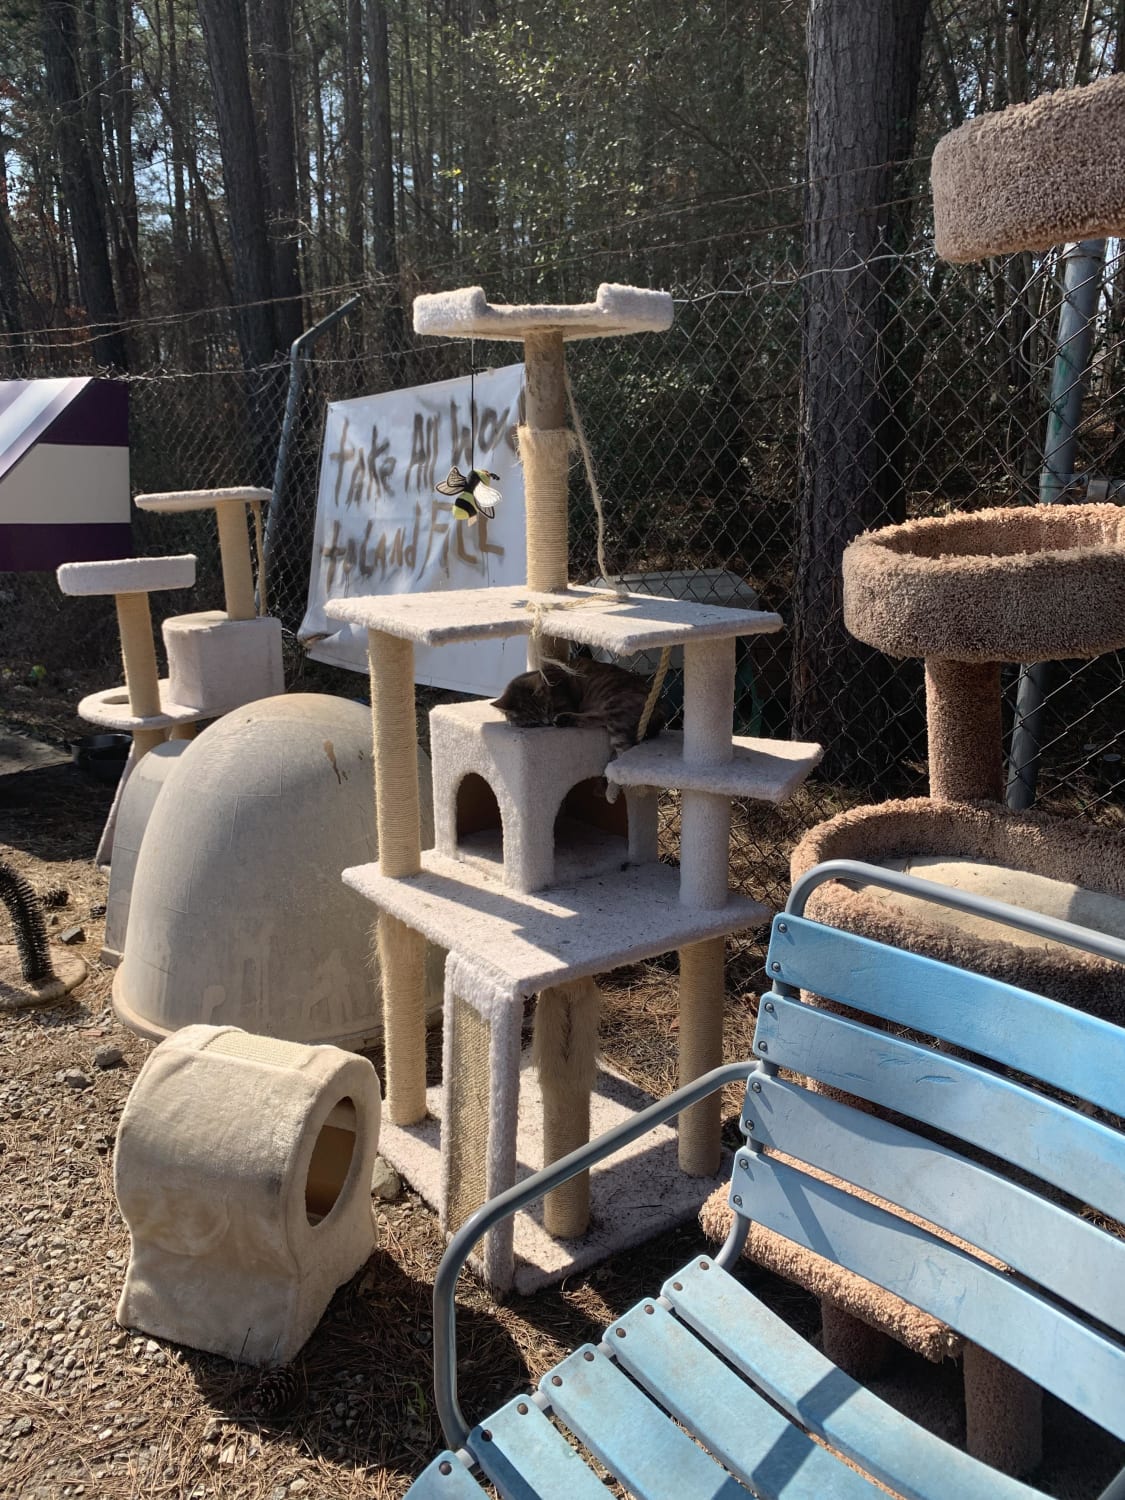 At my local dump, the crew saves the cat trees for the stray cats.